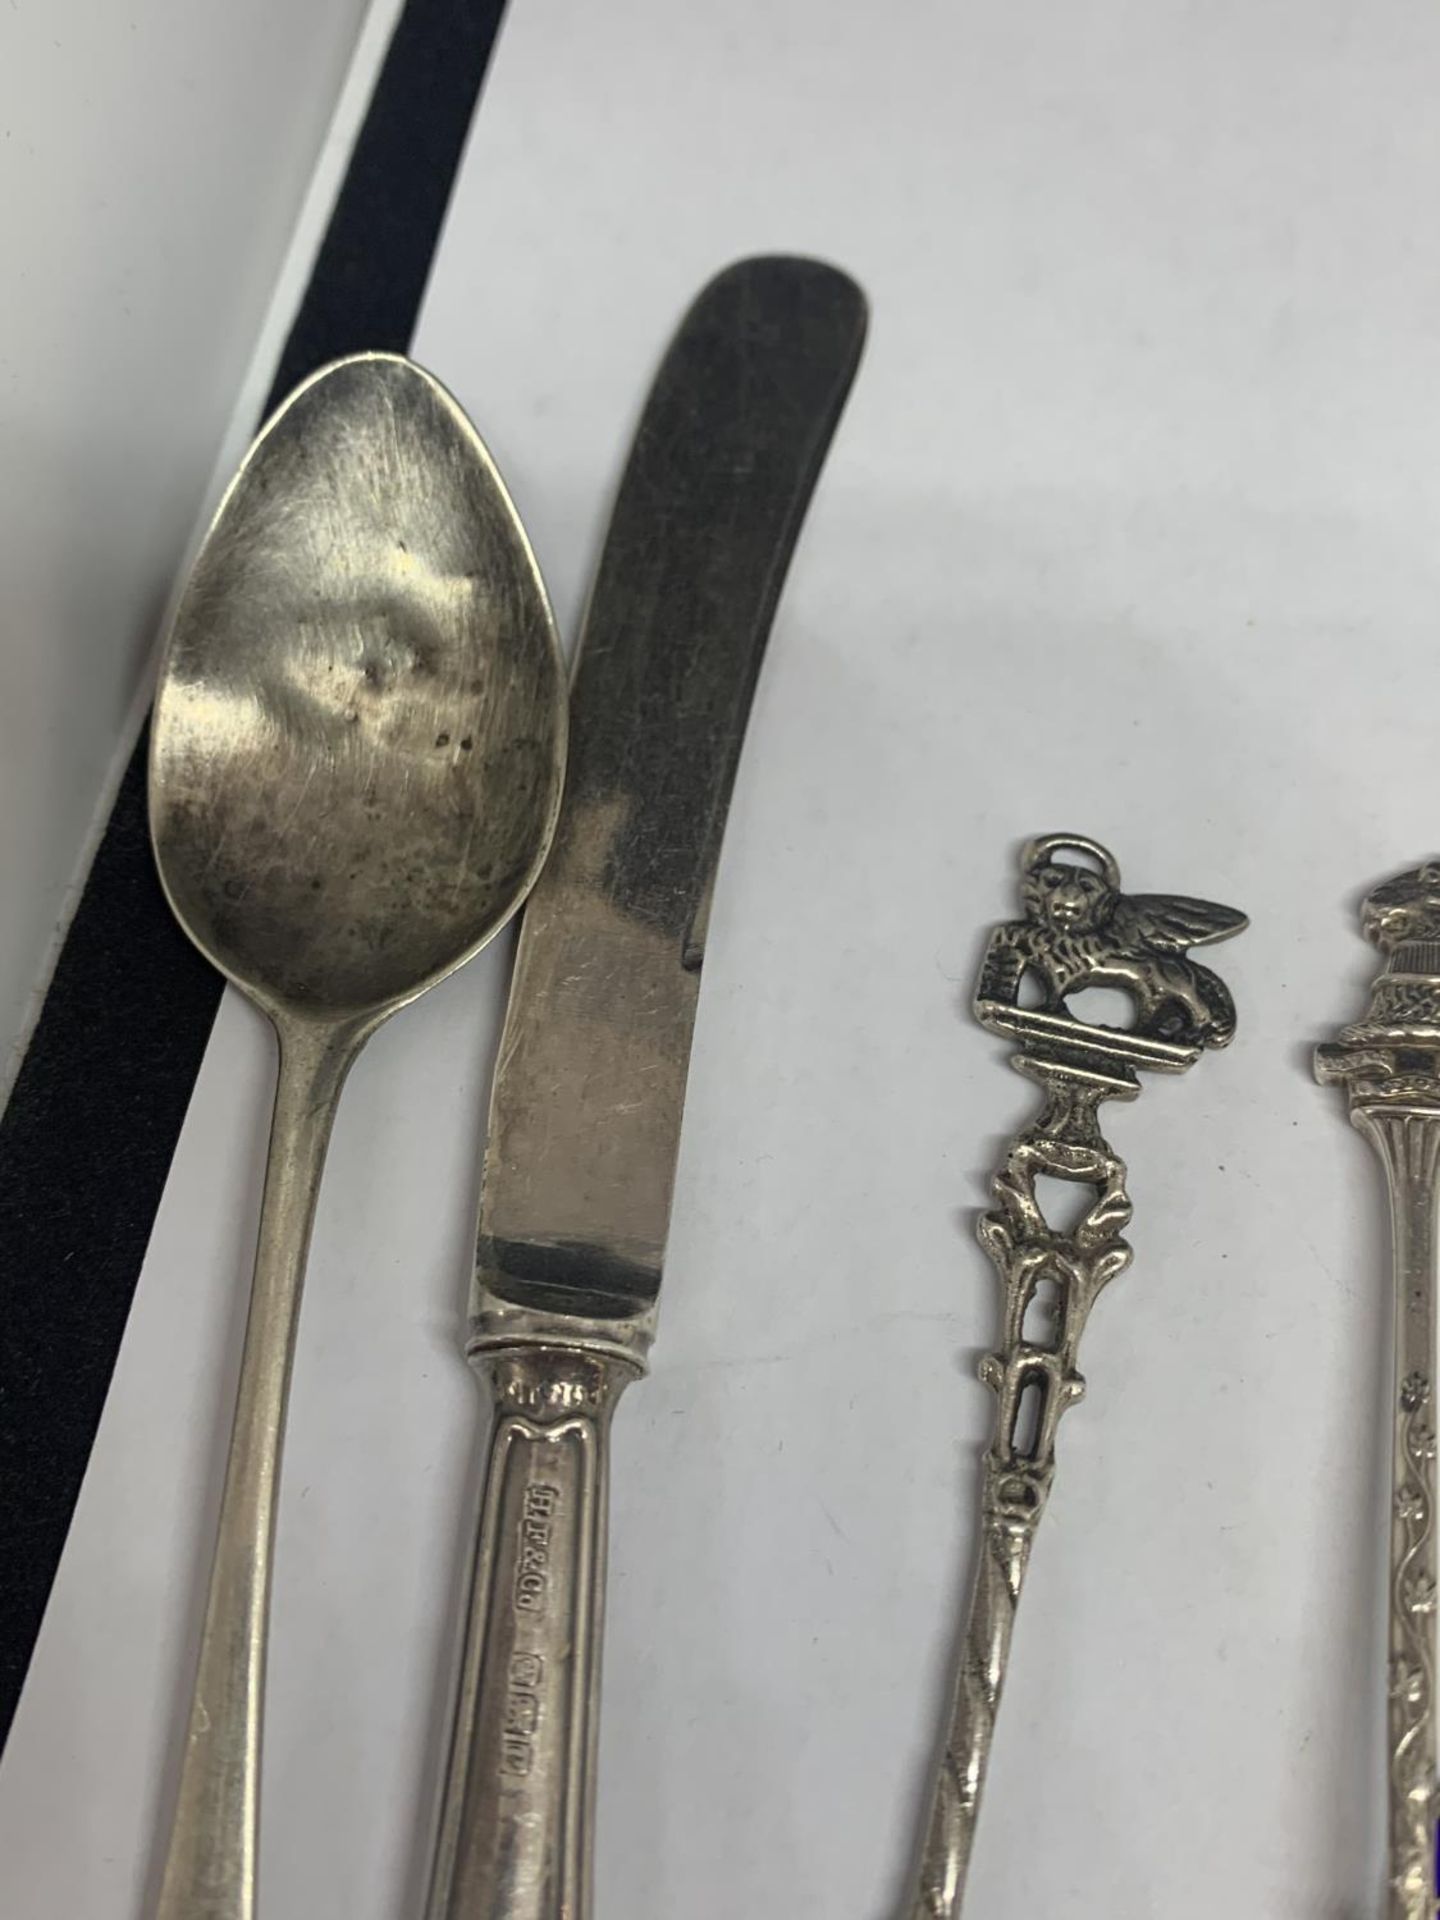 11 PIECES OF HALLMARKED SILVER CUTLERY ALL ITEMS ARE INDIVIDUALLY HALLMARKED GROSS WEIGHT 184g - Image 5 of 5